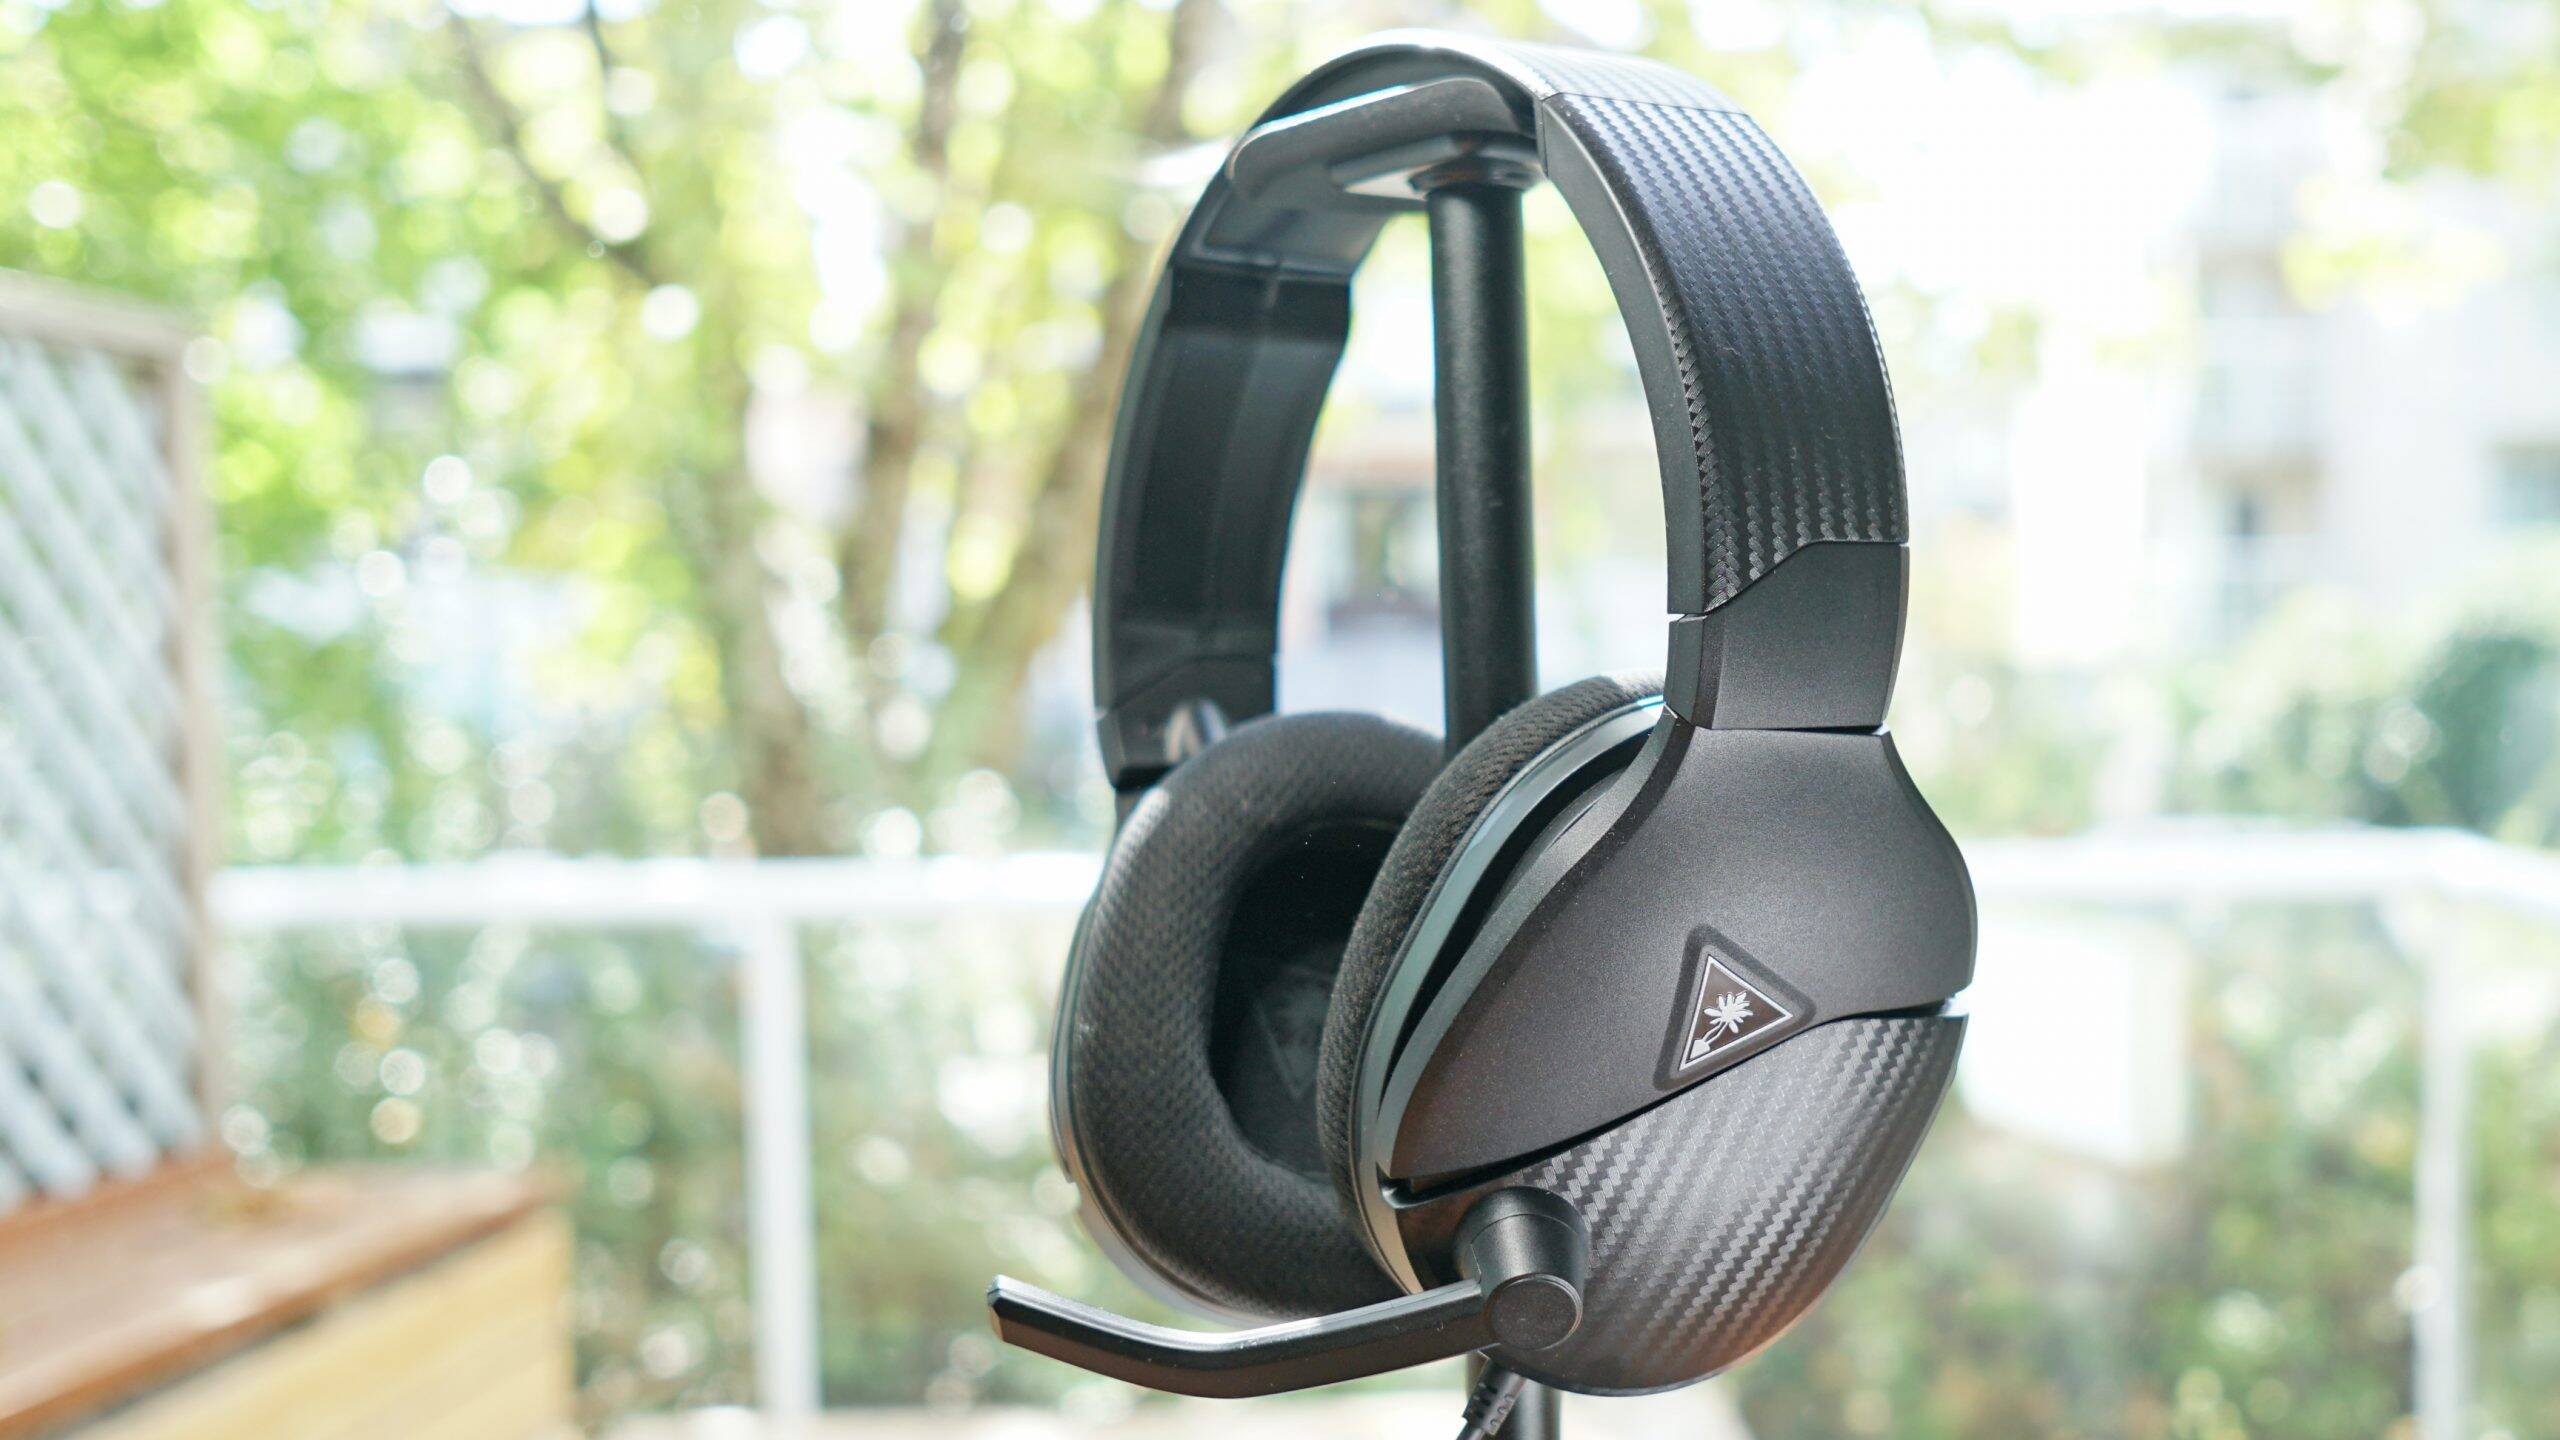 how-long-is-the-cord-for-recon-200-gaming-headset-by-turtle-beach